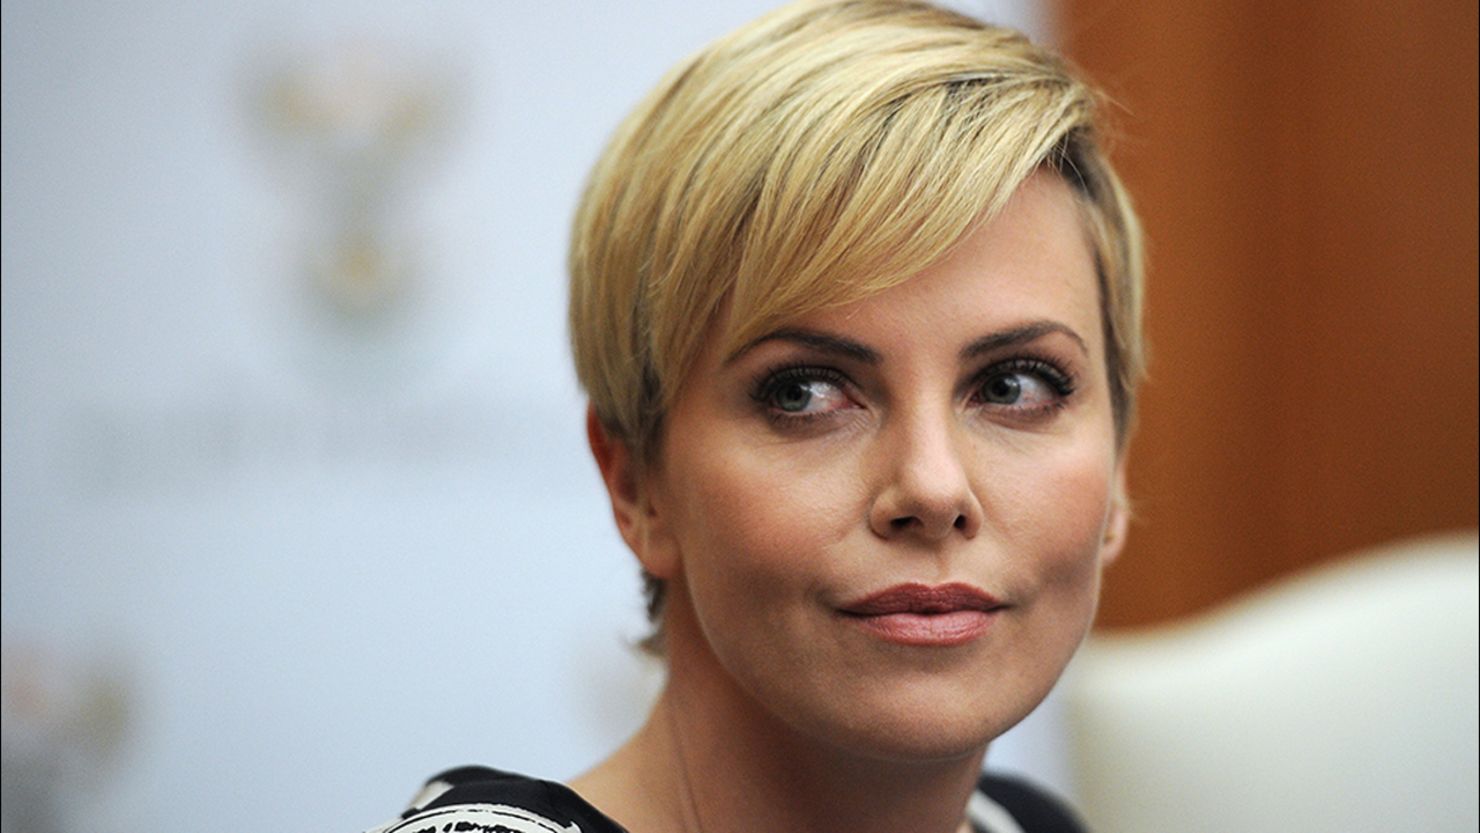 Judge Michael Maggio said Charlize Theron was trying not to be recognized in court. He also offered to be "the baby daddy," documents said.